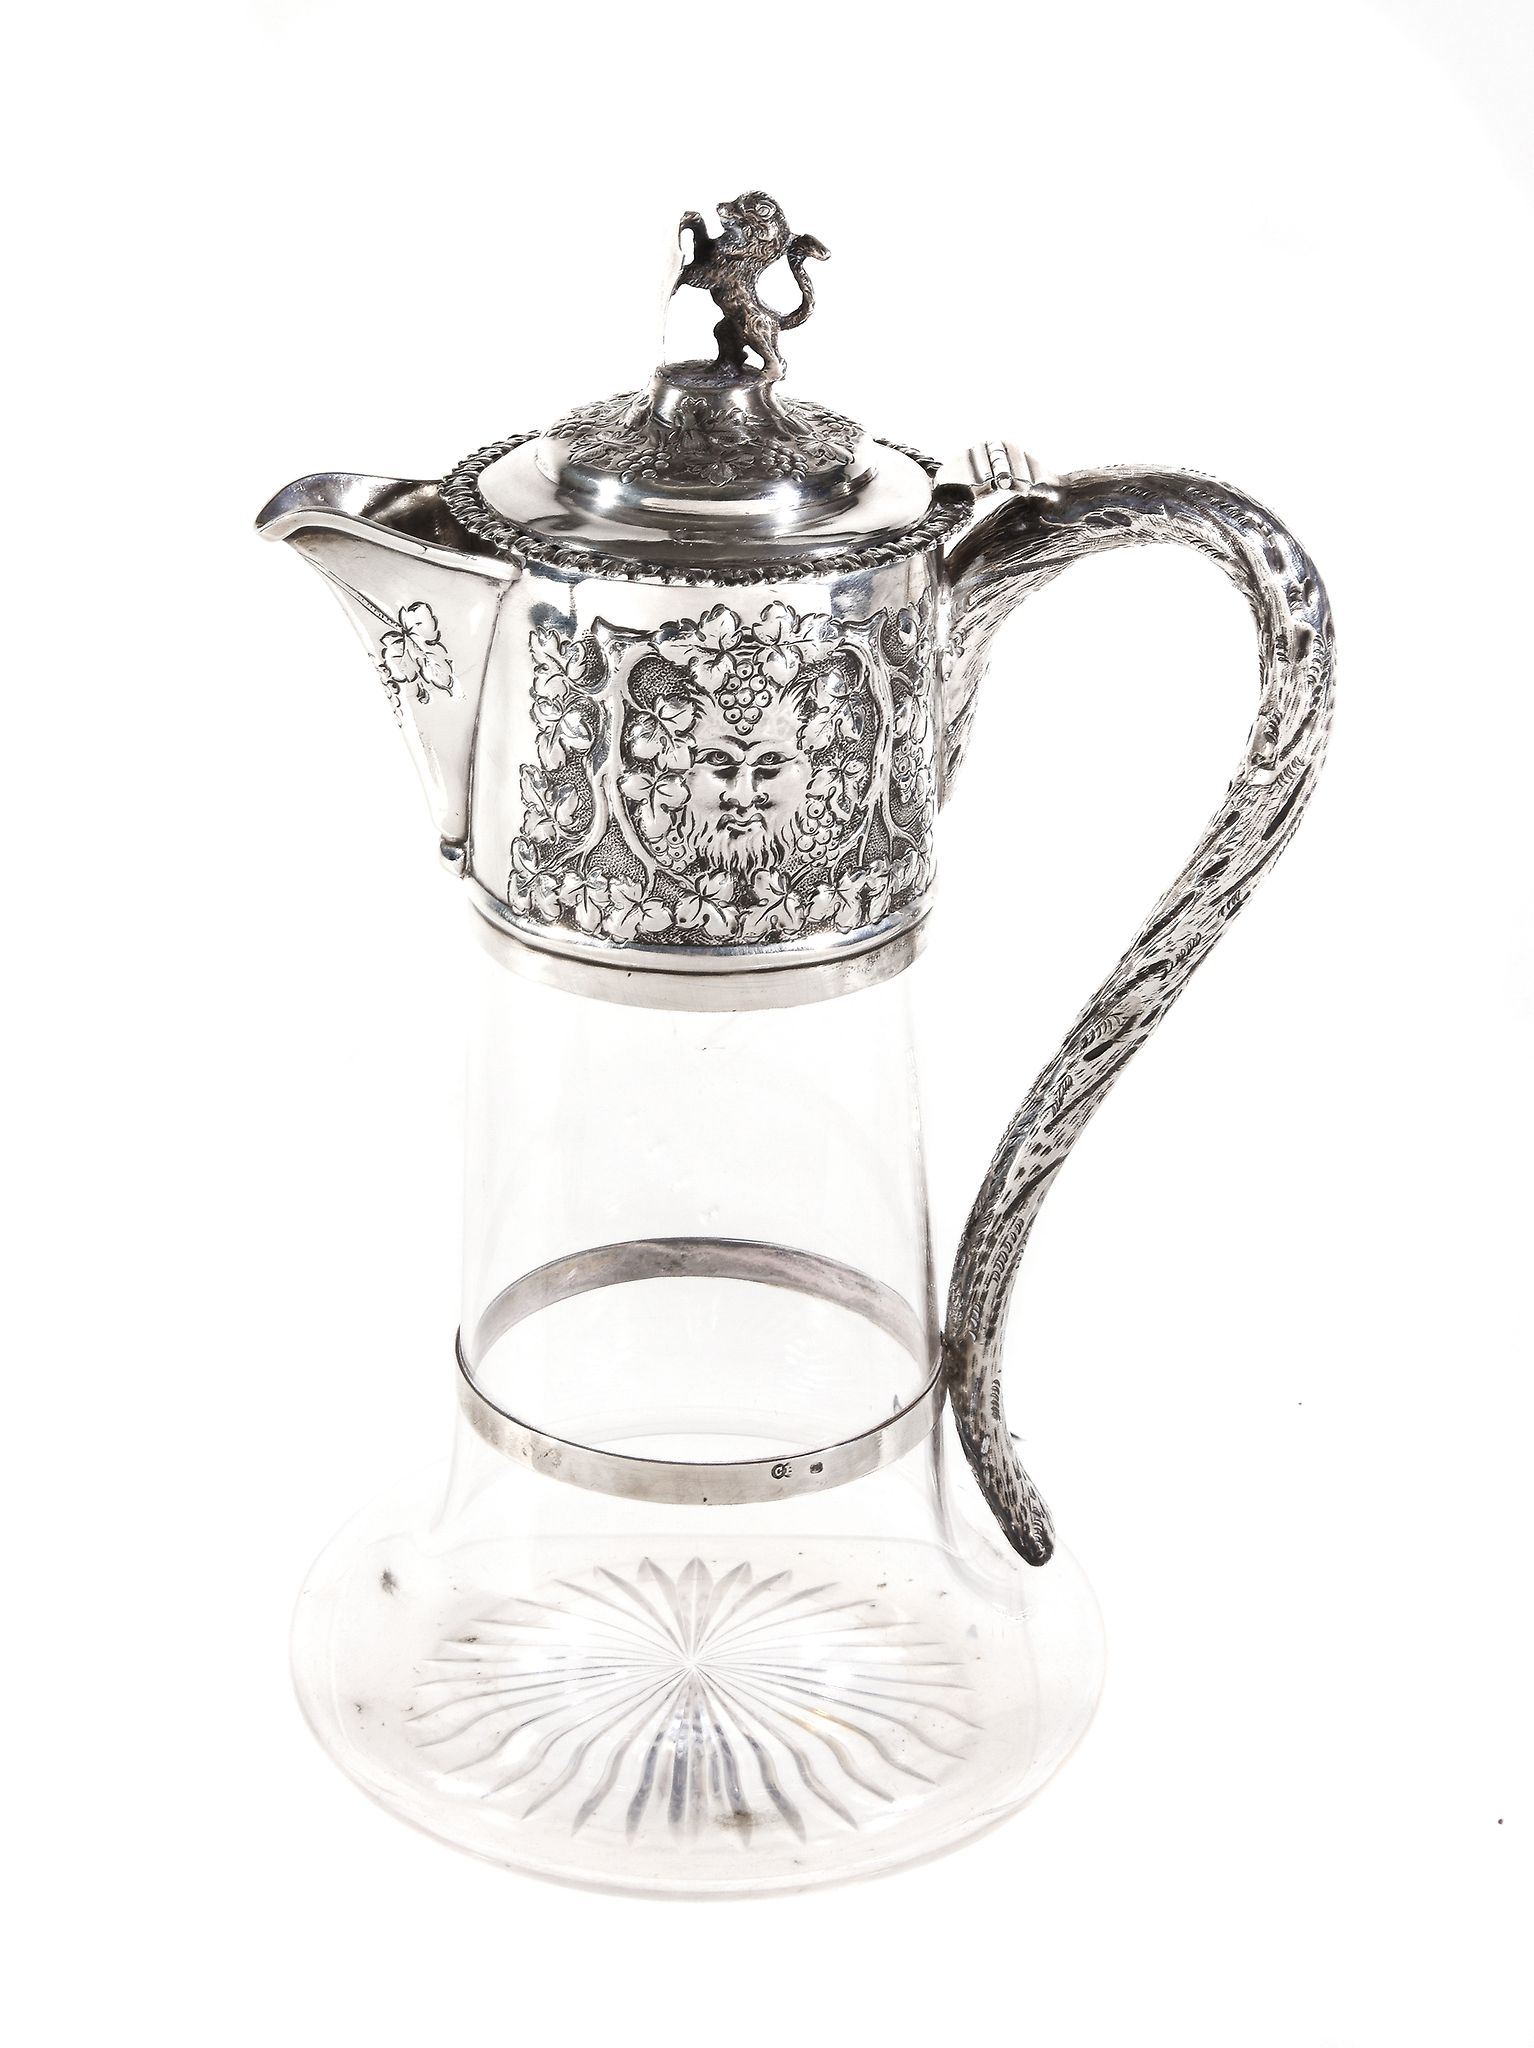 A Victorian silver mounted clear glass claret jug by Charles Boyton II, London 1887, the rampant